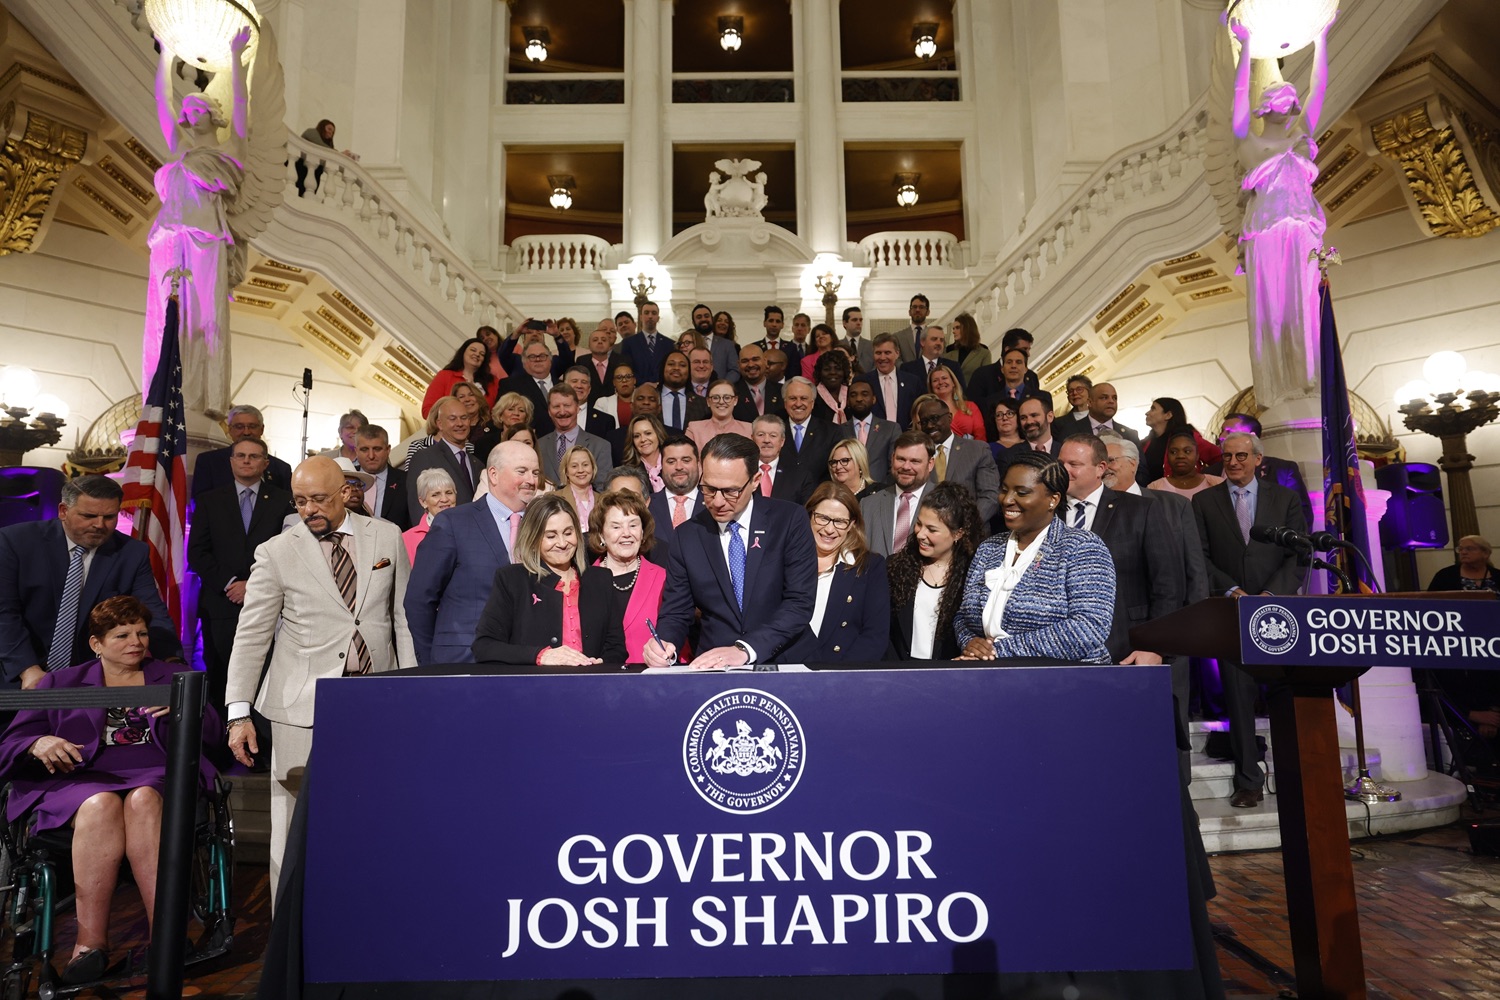 Governor Josh Shapiro signed the first bill of his Administration - Act 1 of 2023, a first-of-its-kind law in the nation that will require insurers to cover preventive breast and ovarian cancer screenings for high-risk women at no cost. MAY 01, 2023 - HARRISBURG, PA<br><a href="https://filesource.amperwave.net/commonwealthofpa/photo/23041_gov_sb8_dz_002.JPG" target="_blank">⇣ Download Photo</a>